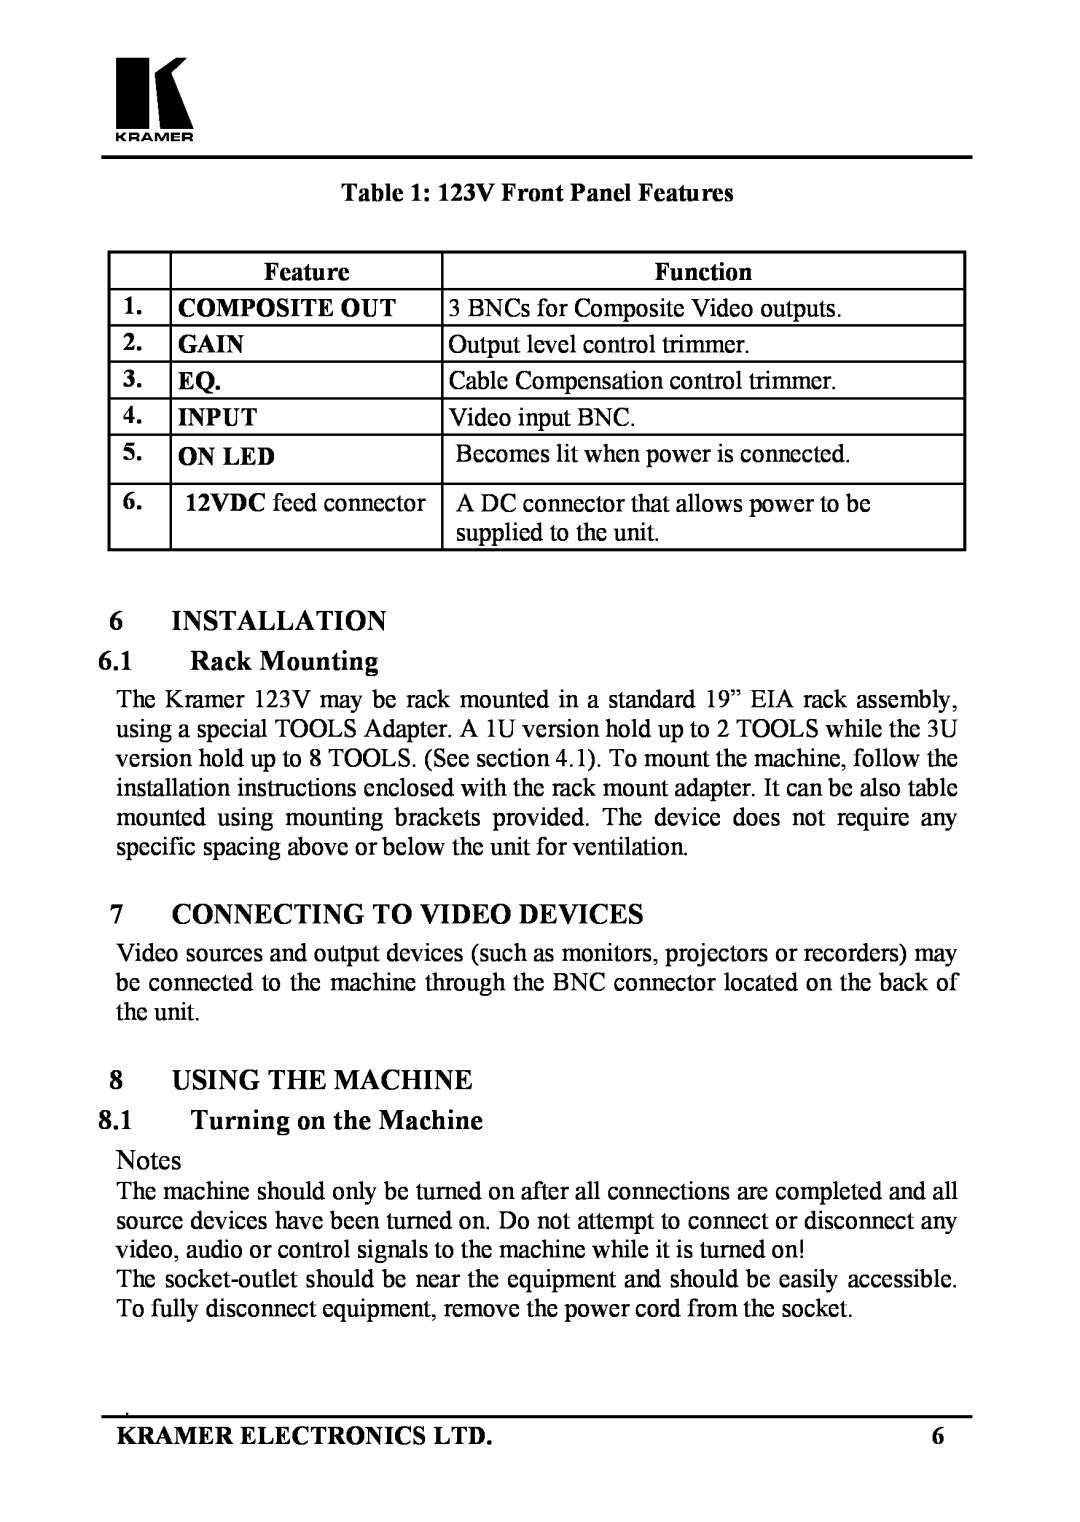 Kramer Electronics 123V user manual INSTALLATION 6.1 Rack Mounting, Connecting To Video Devices 